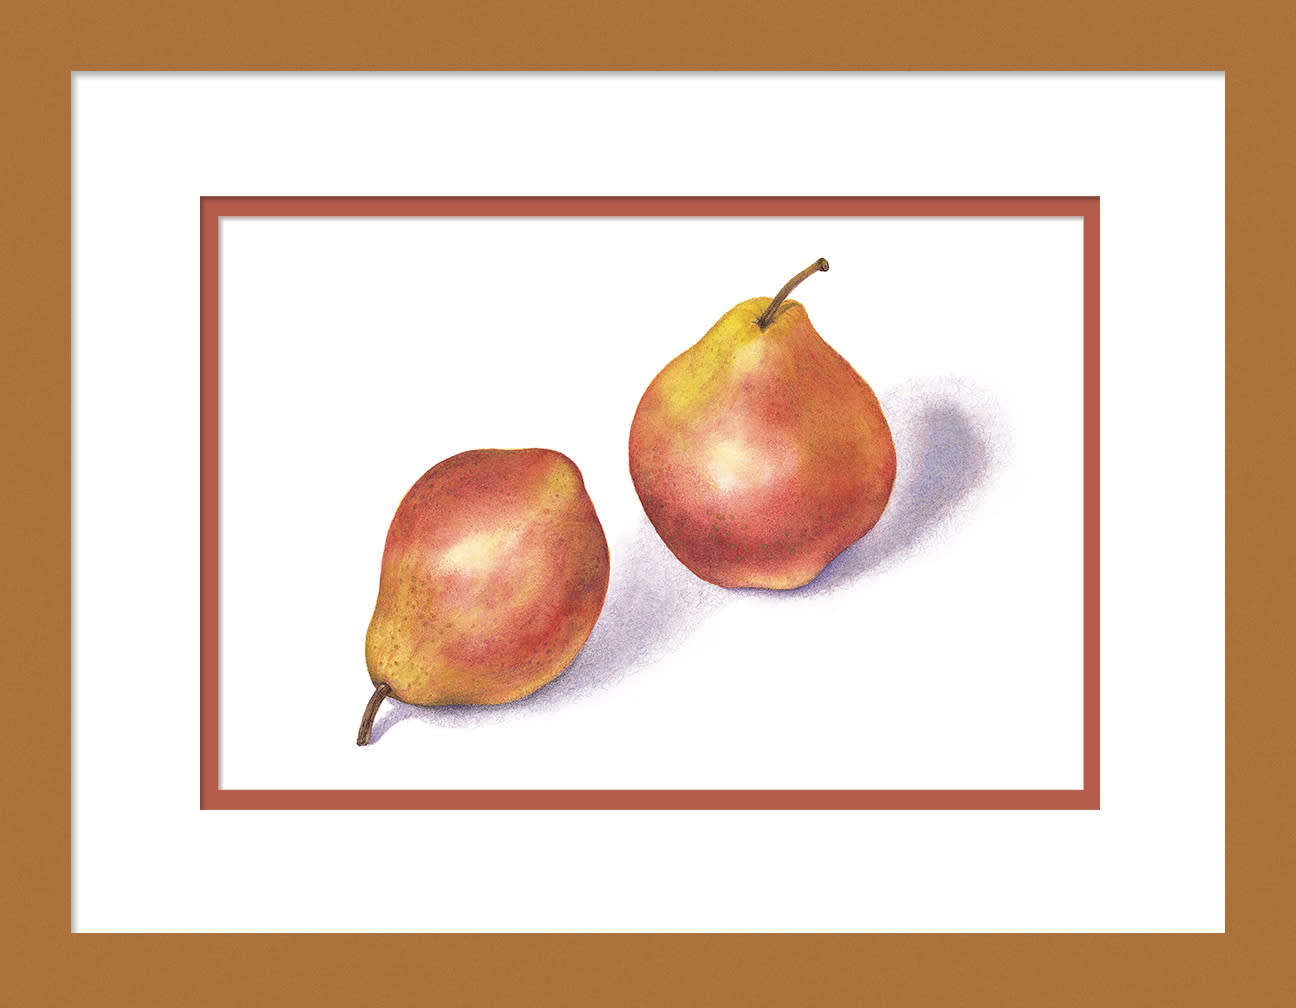 030502 red pears 2 8x12 framed to 12x16 pqlyg7